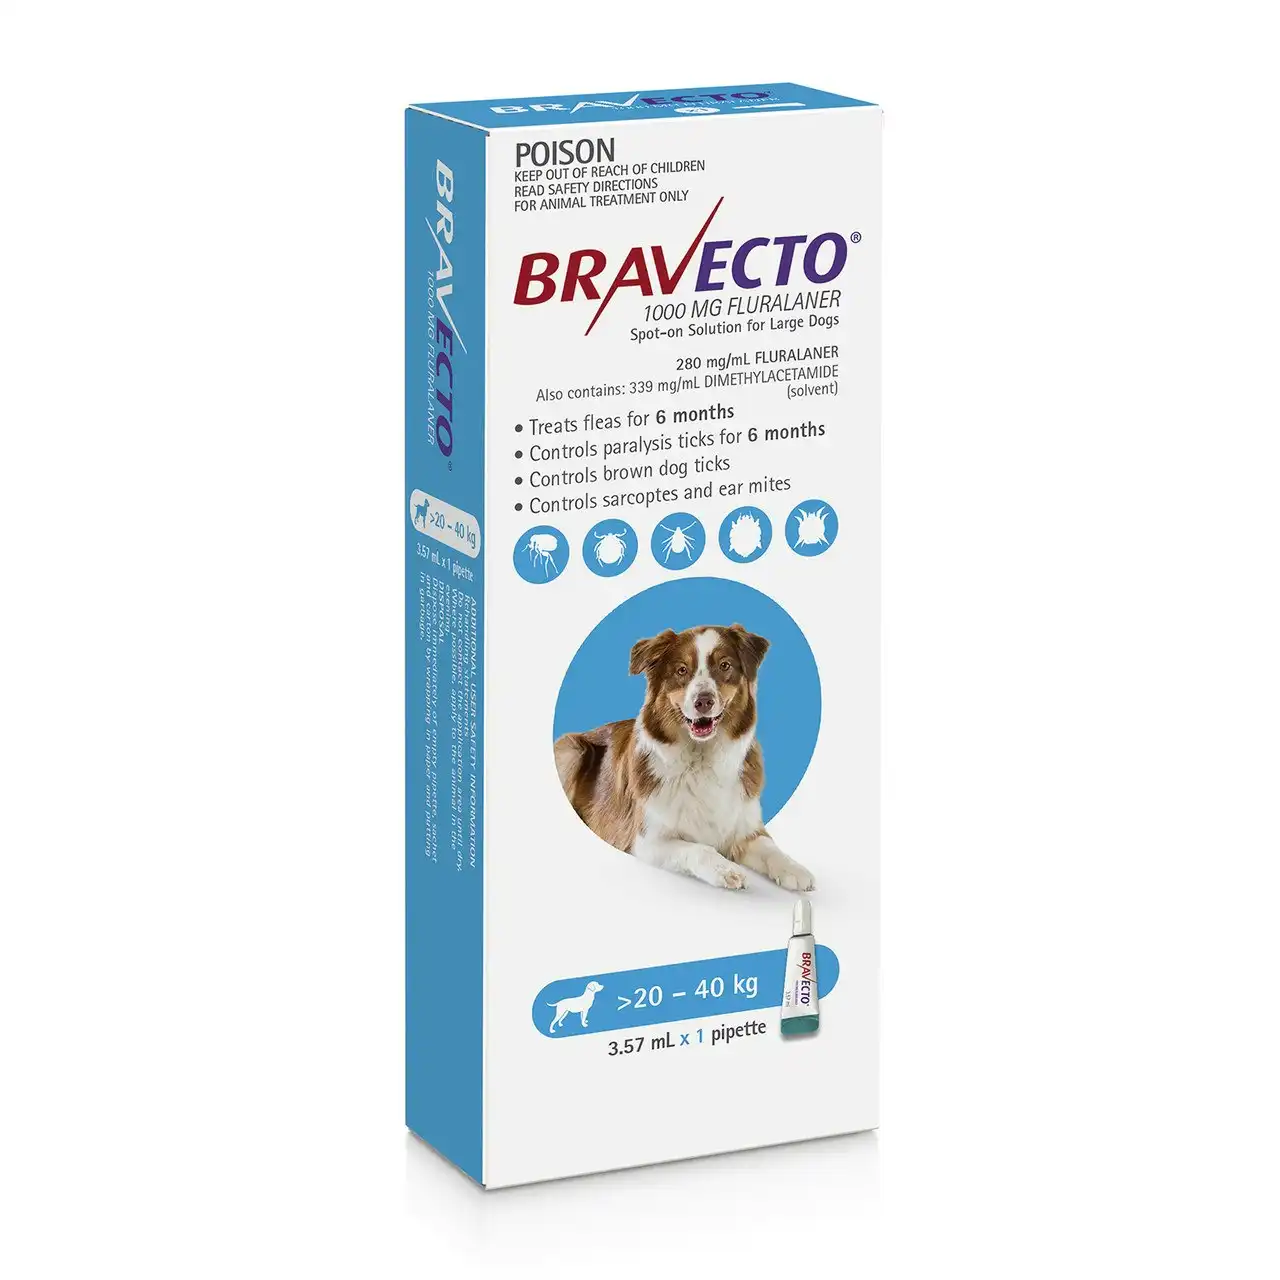 Bravecto Spot On For Large Dogs 20 - 40kg (1 Pipette)